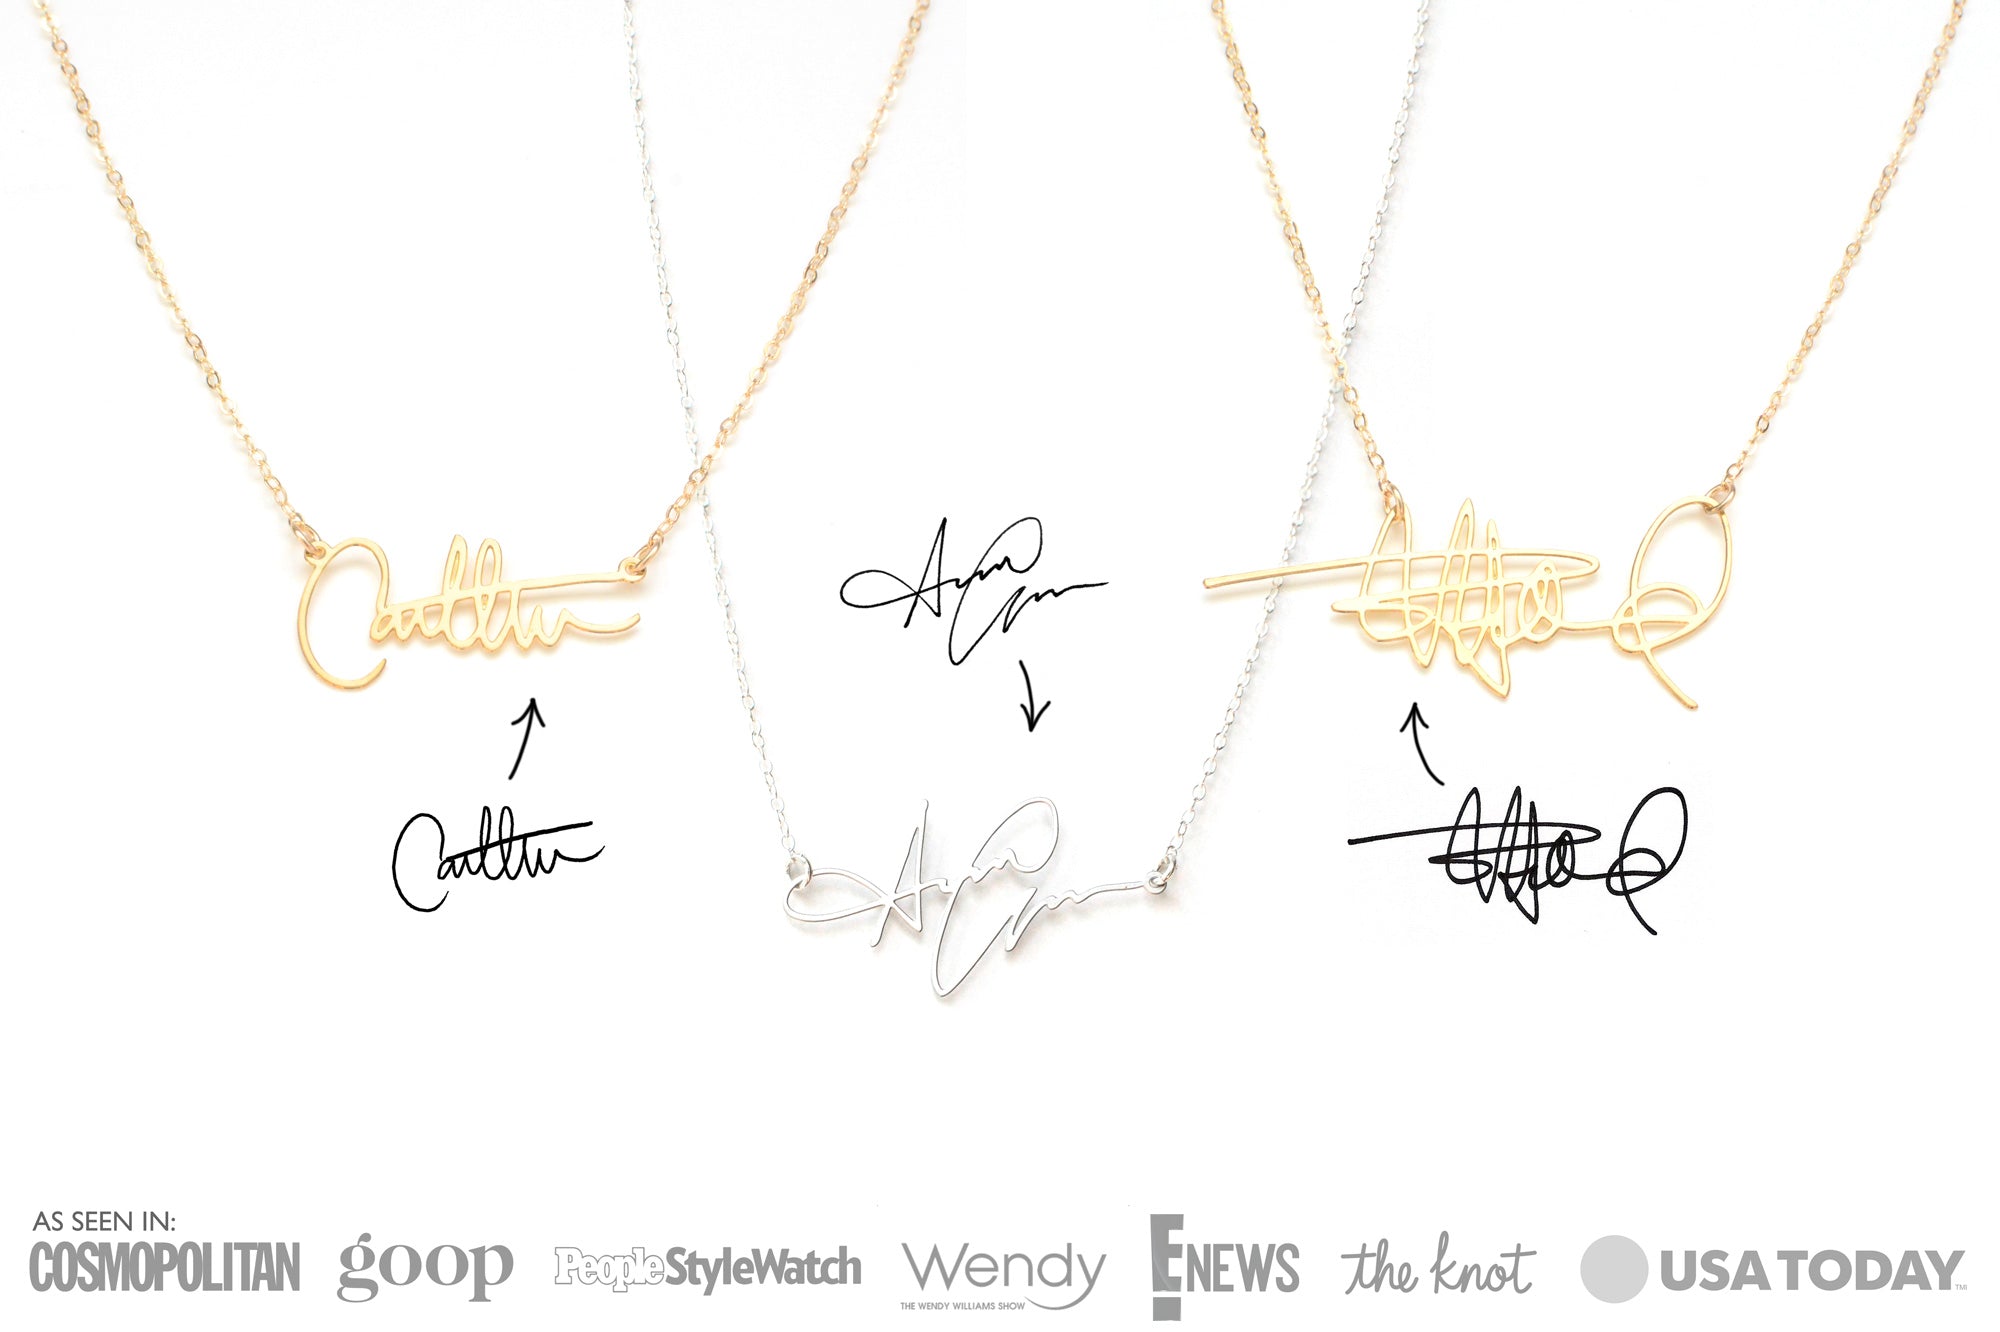 Signature Necklace - Made From Your Handwriting or Signature - High Quality, Affordable, One-of-a-kind, Personalized Necklace - Available in Gold and Silver - Made in USA - Brevity Jewelry - The Pefect Gift